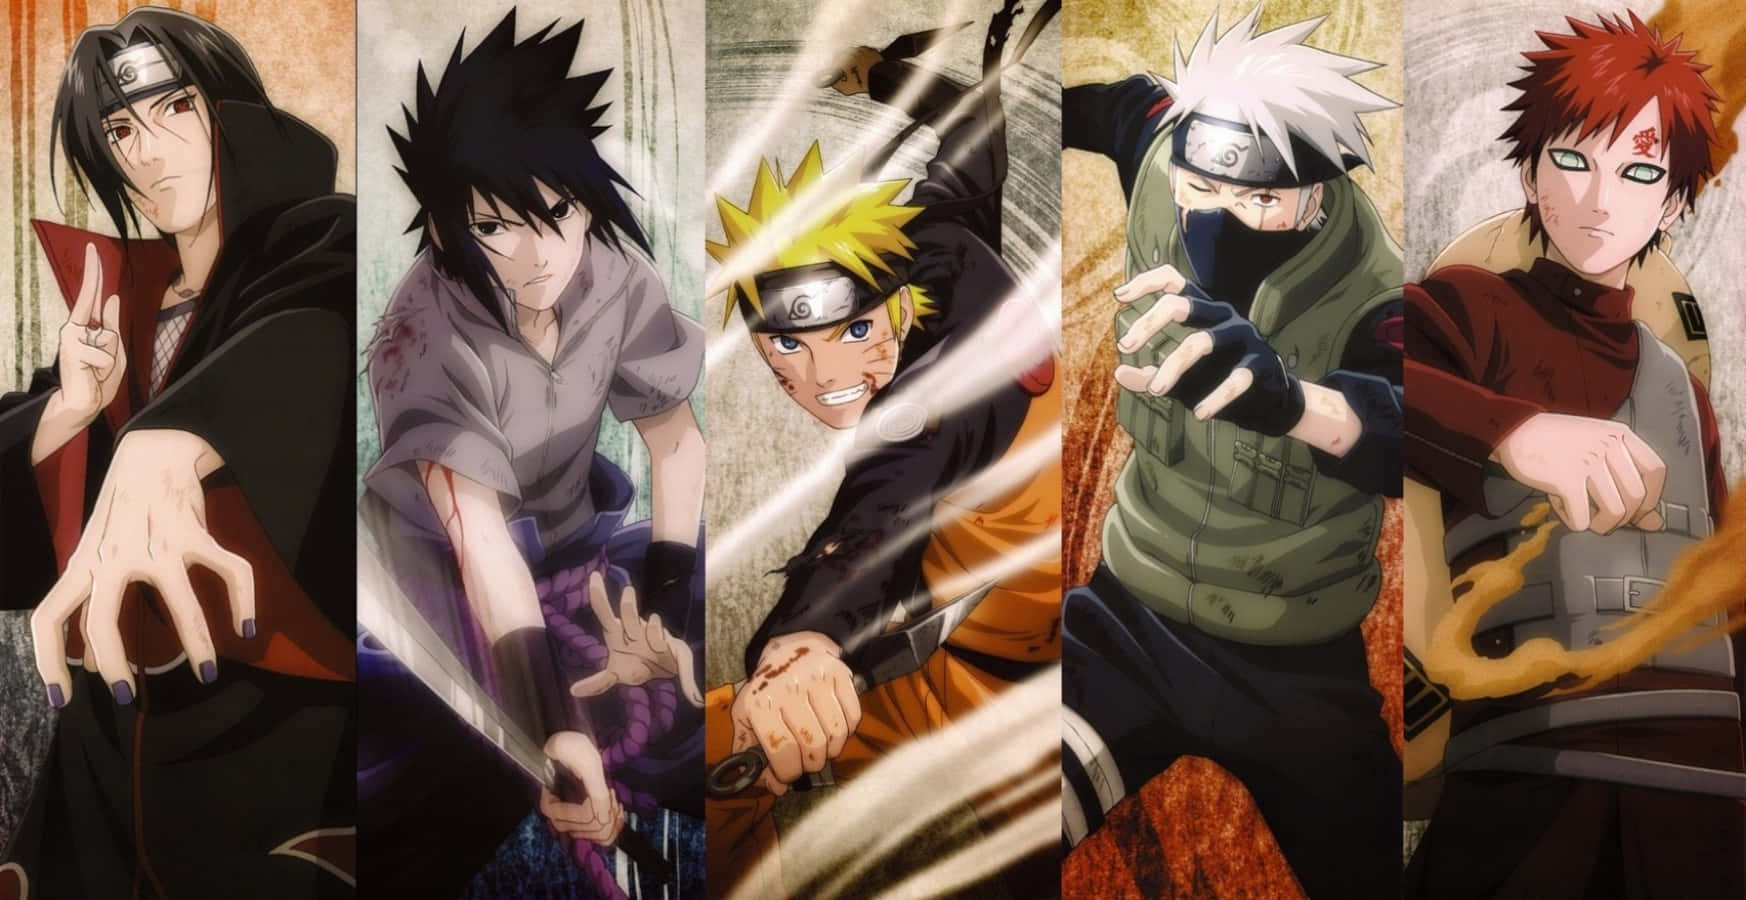 Anime Naruto HD Wallpaper by friizer